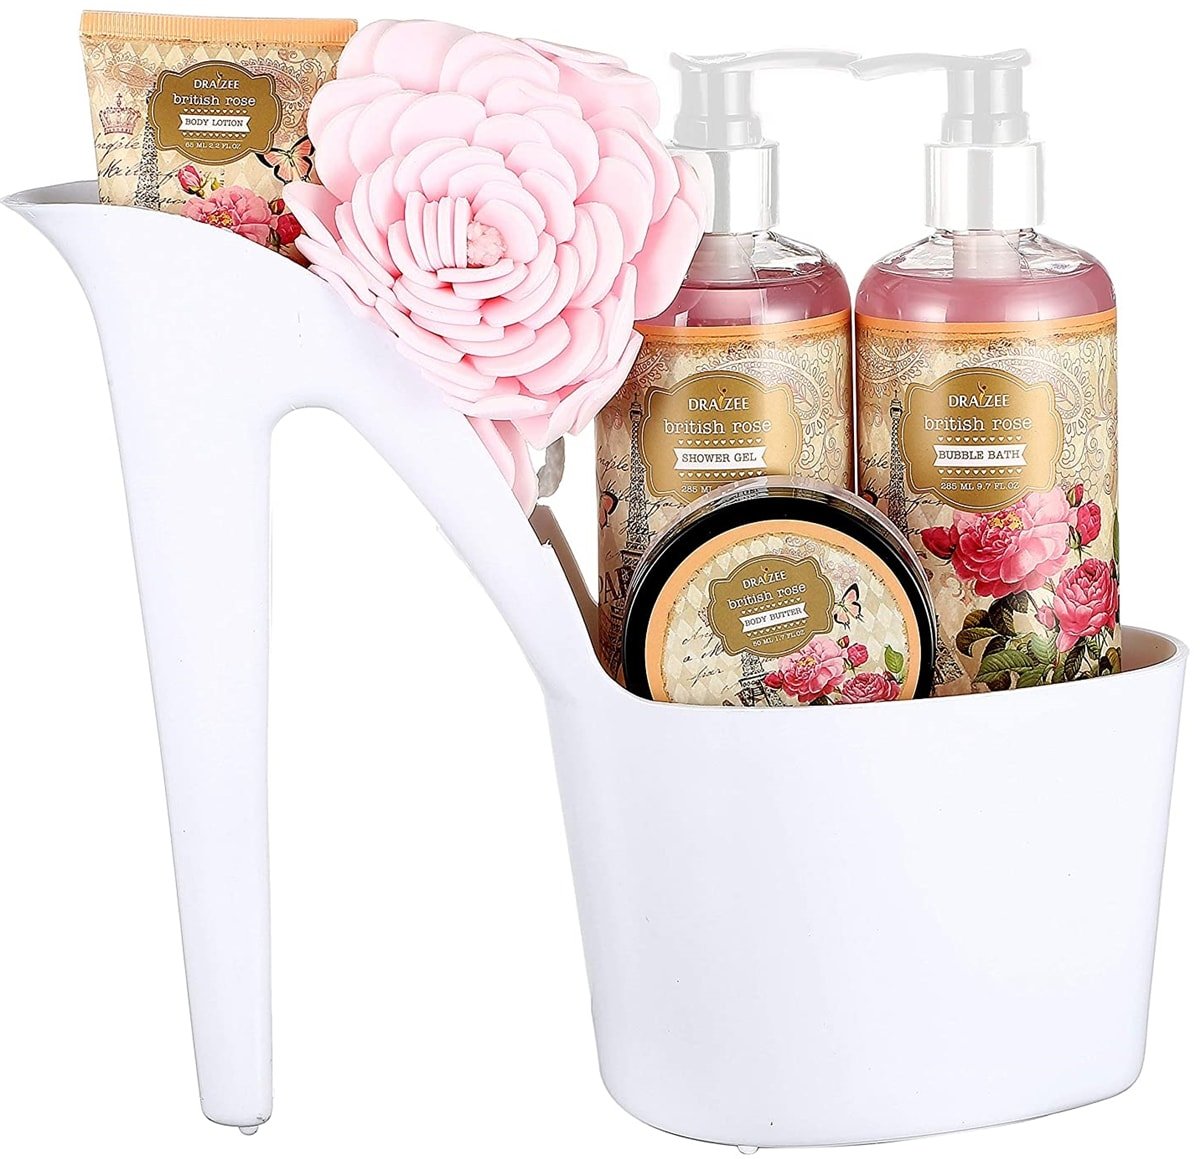 This stunning bath gift set includes 4 amazing rose scented bathing essentials and a rose-shaped bath puff